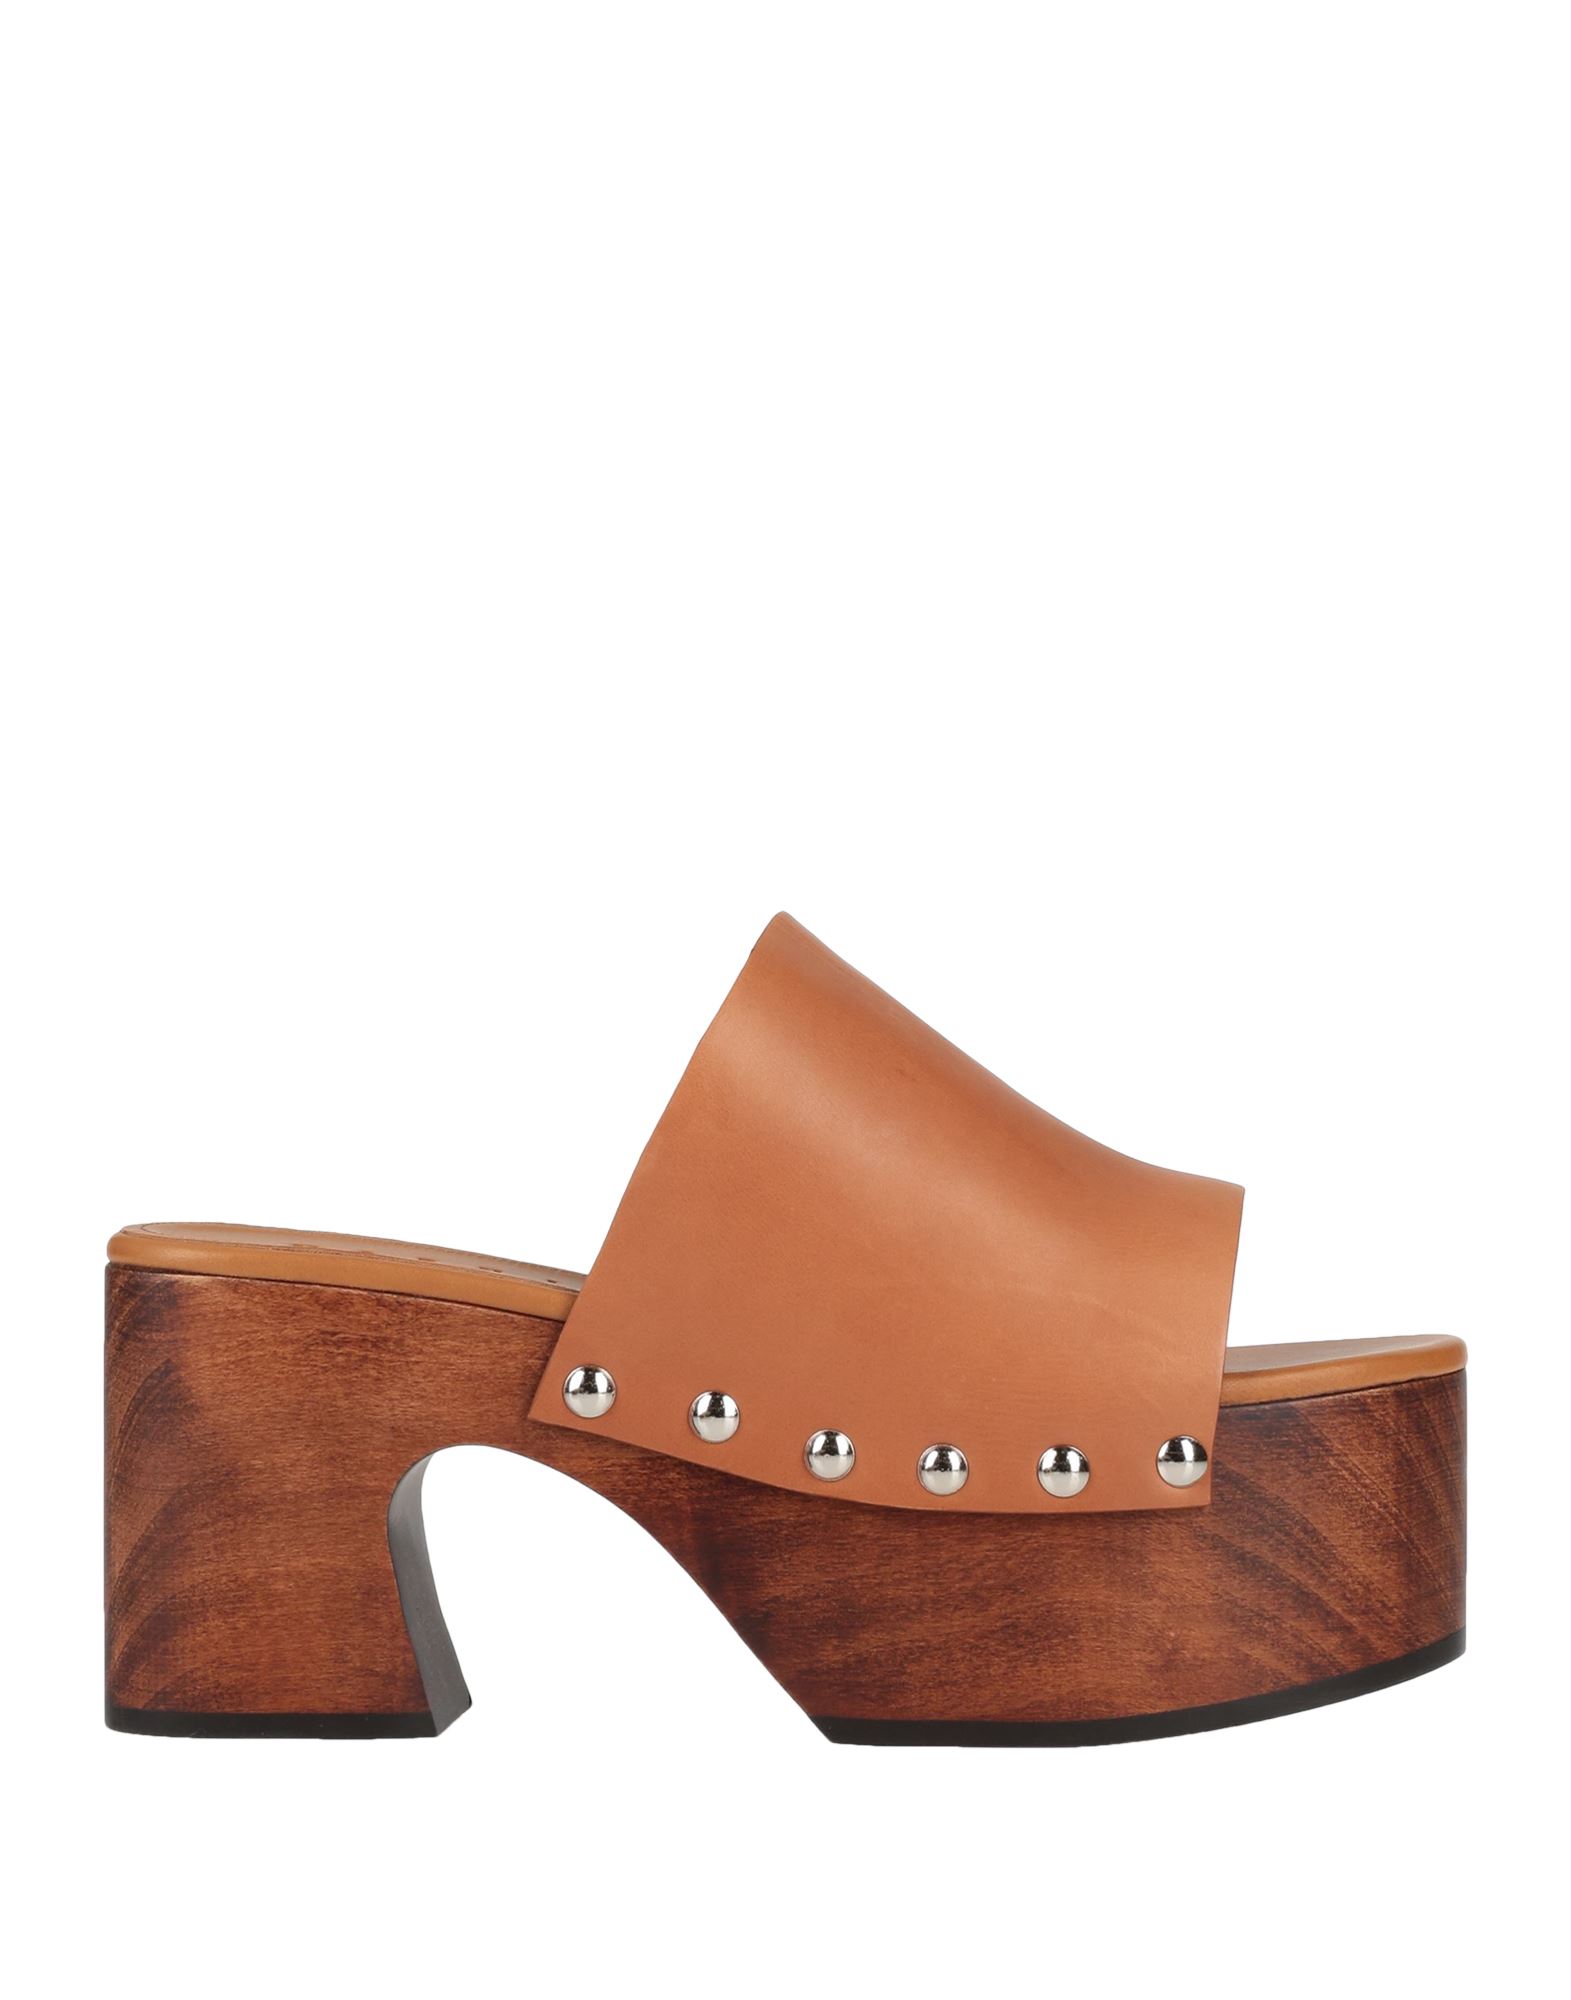 Marni Woman Mules & Clogs Brown Size 9 Soft Leather